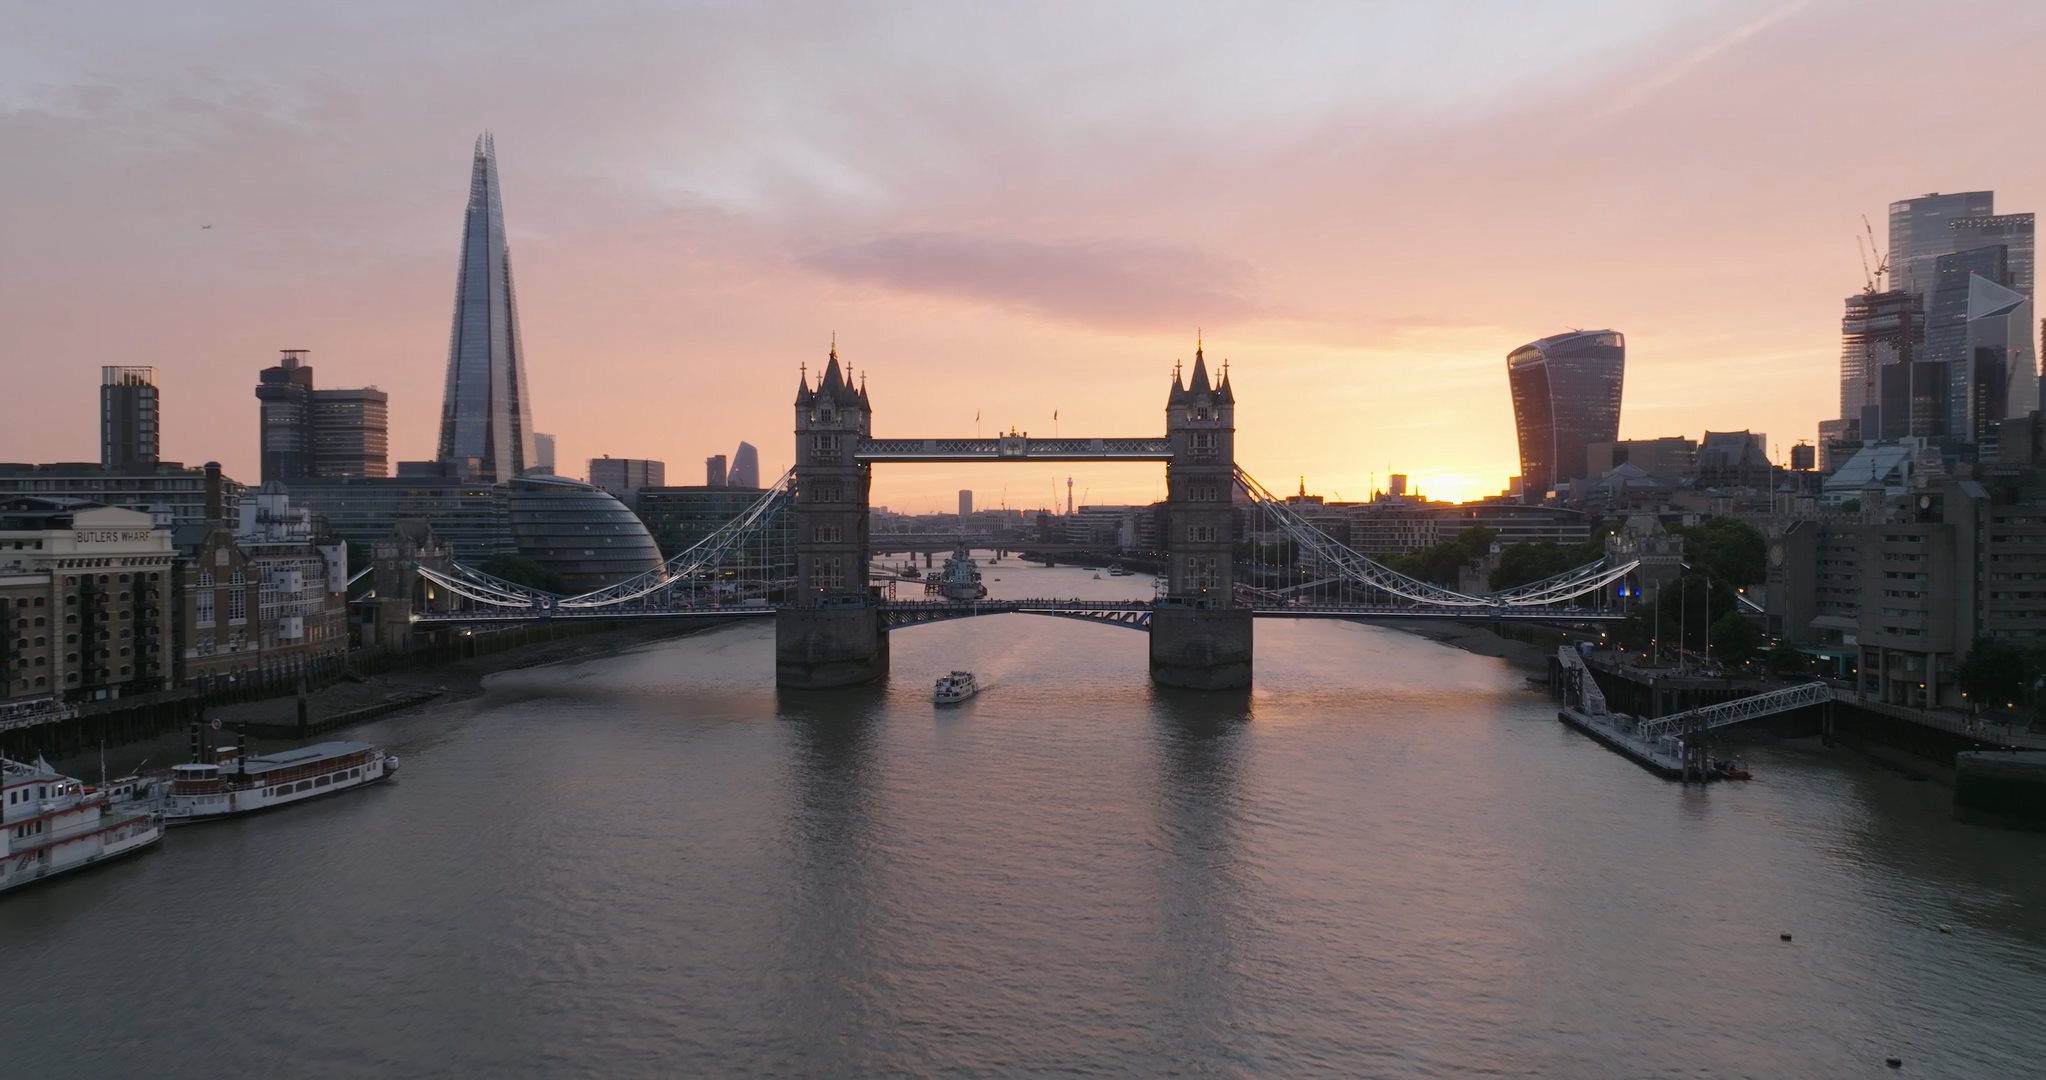 Video of Thames with London Tower Bridge